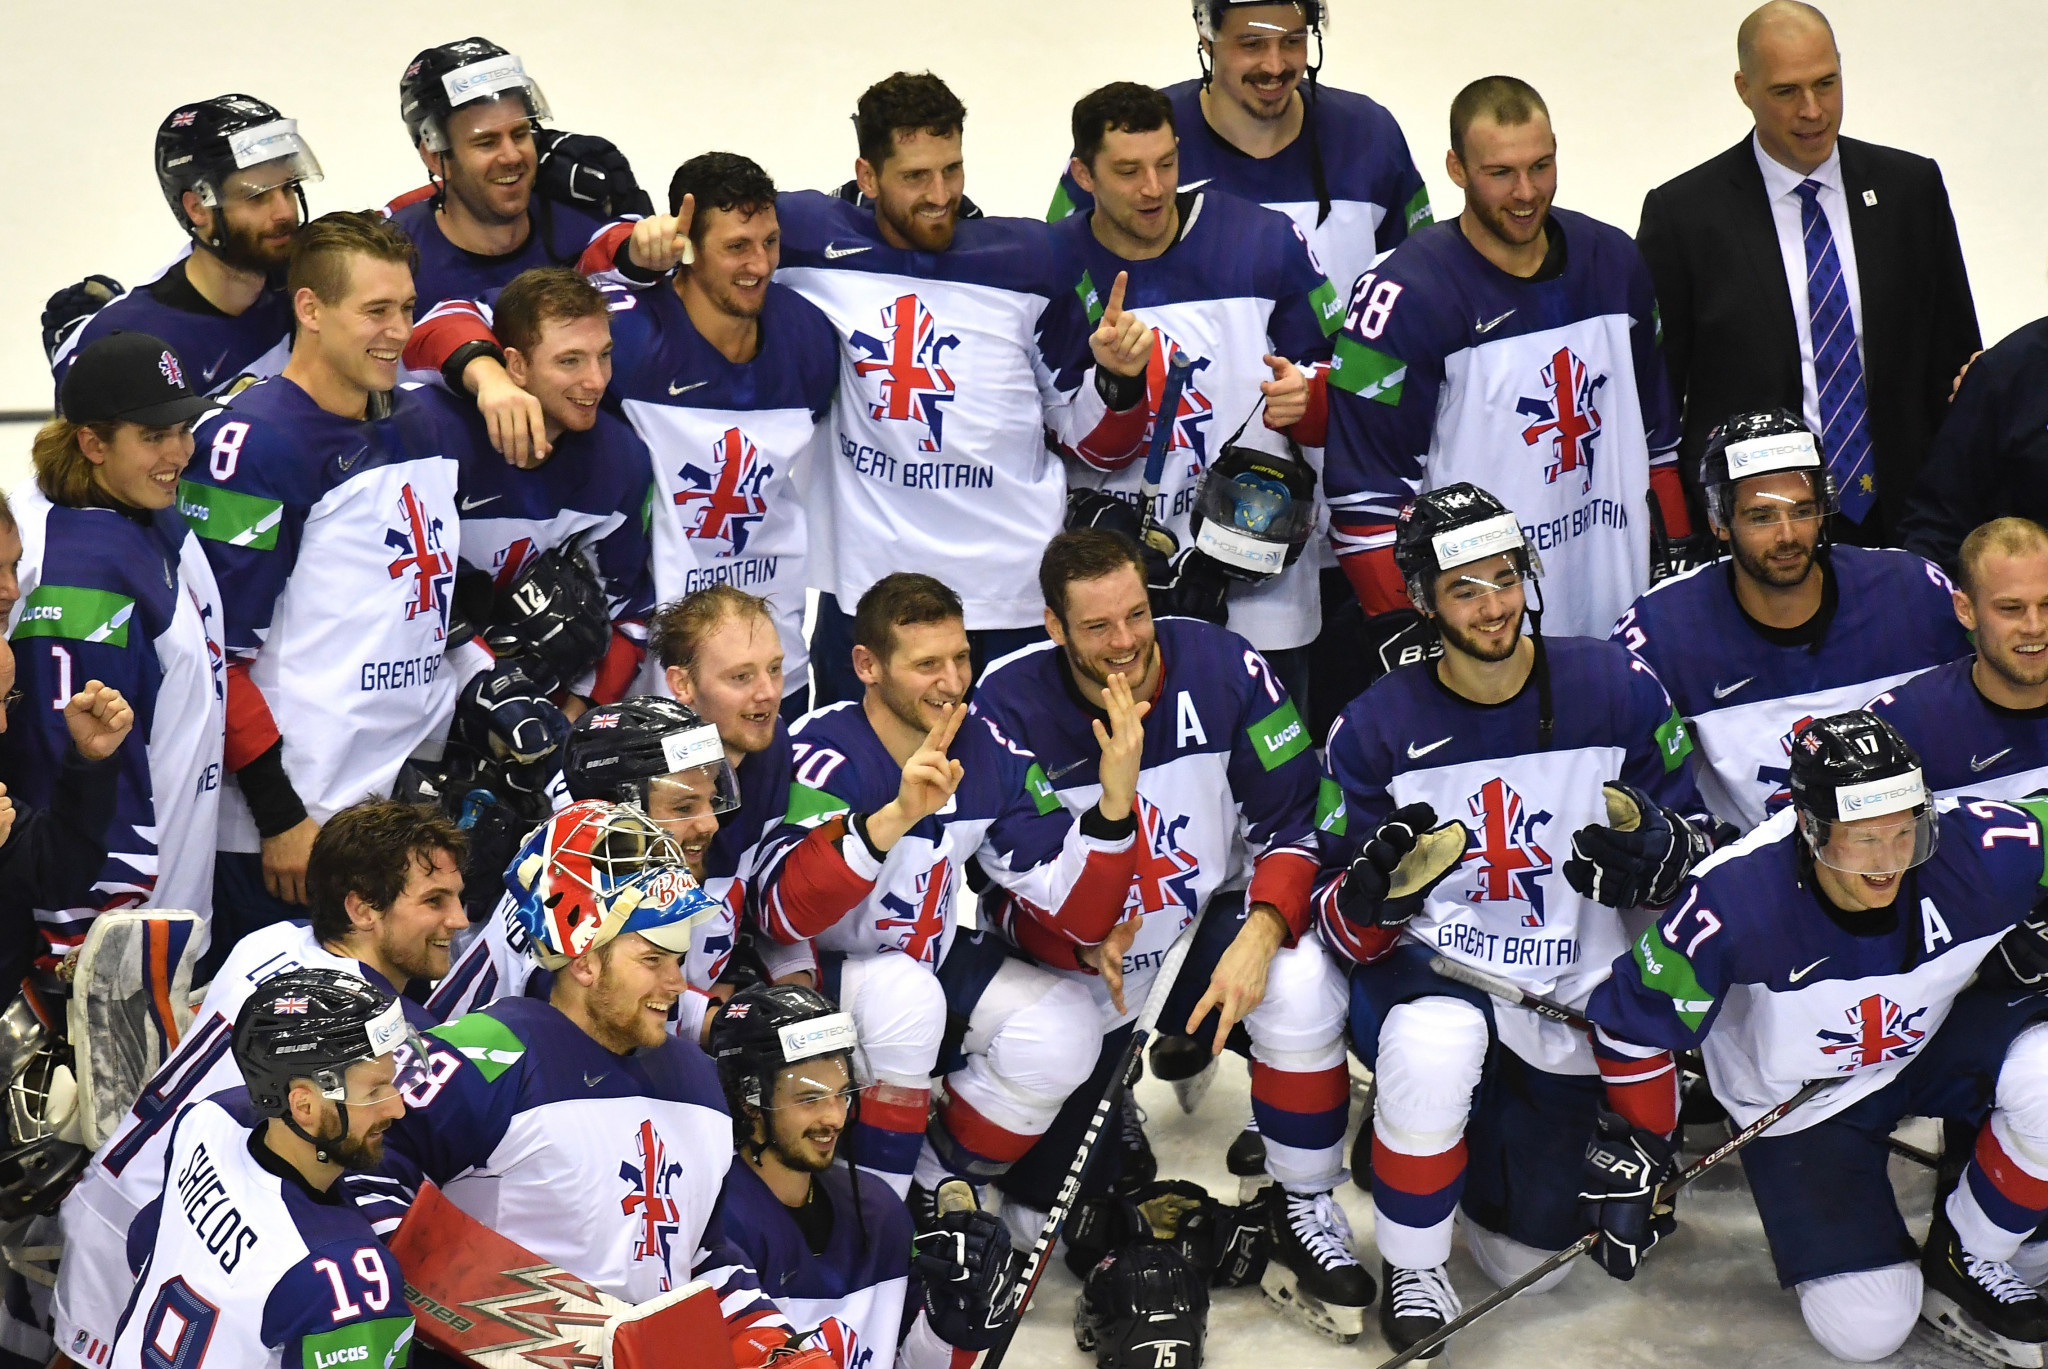 Martin Grubb has been tasked with bringing through the next crop of British ice hockey stars in his new role as head coach of the under-20 national team ©Getty Images